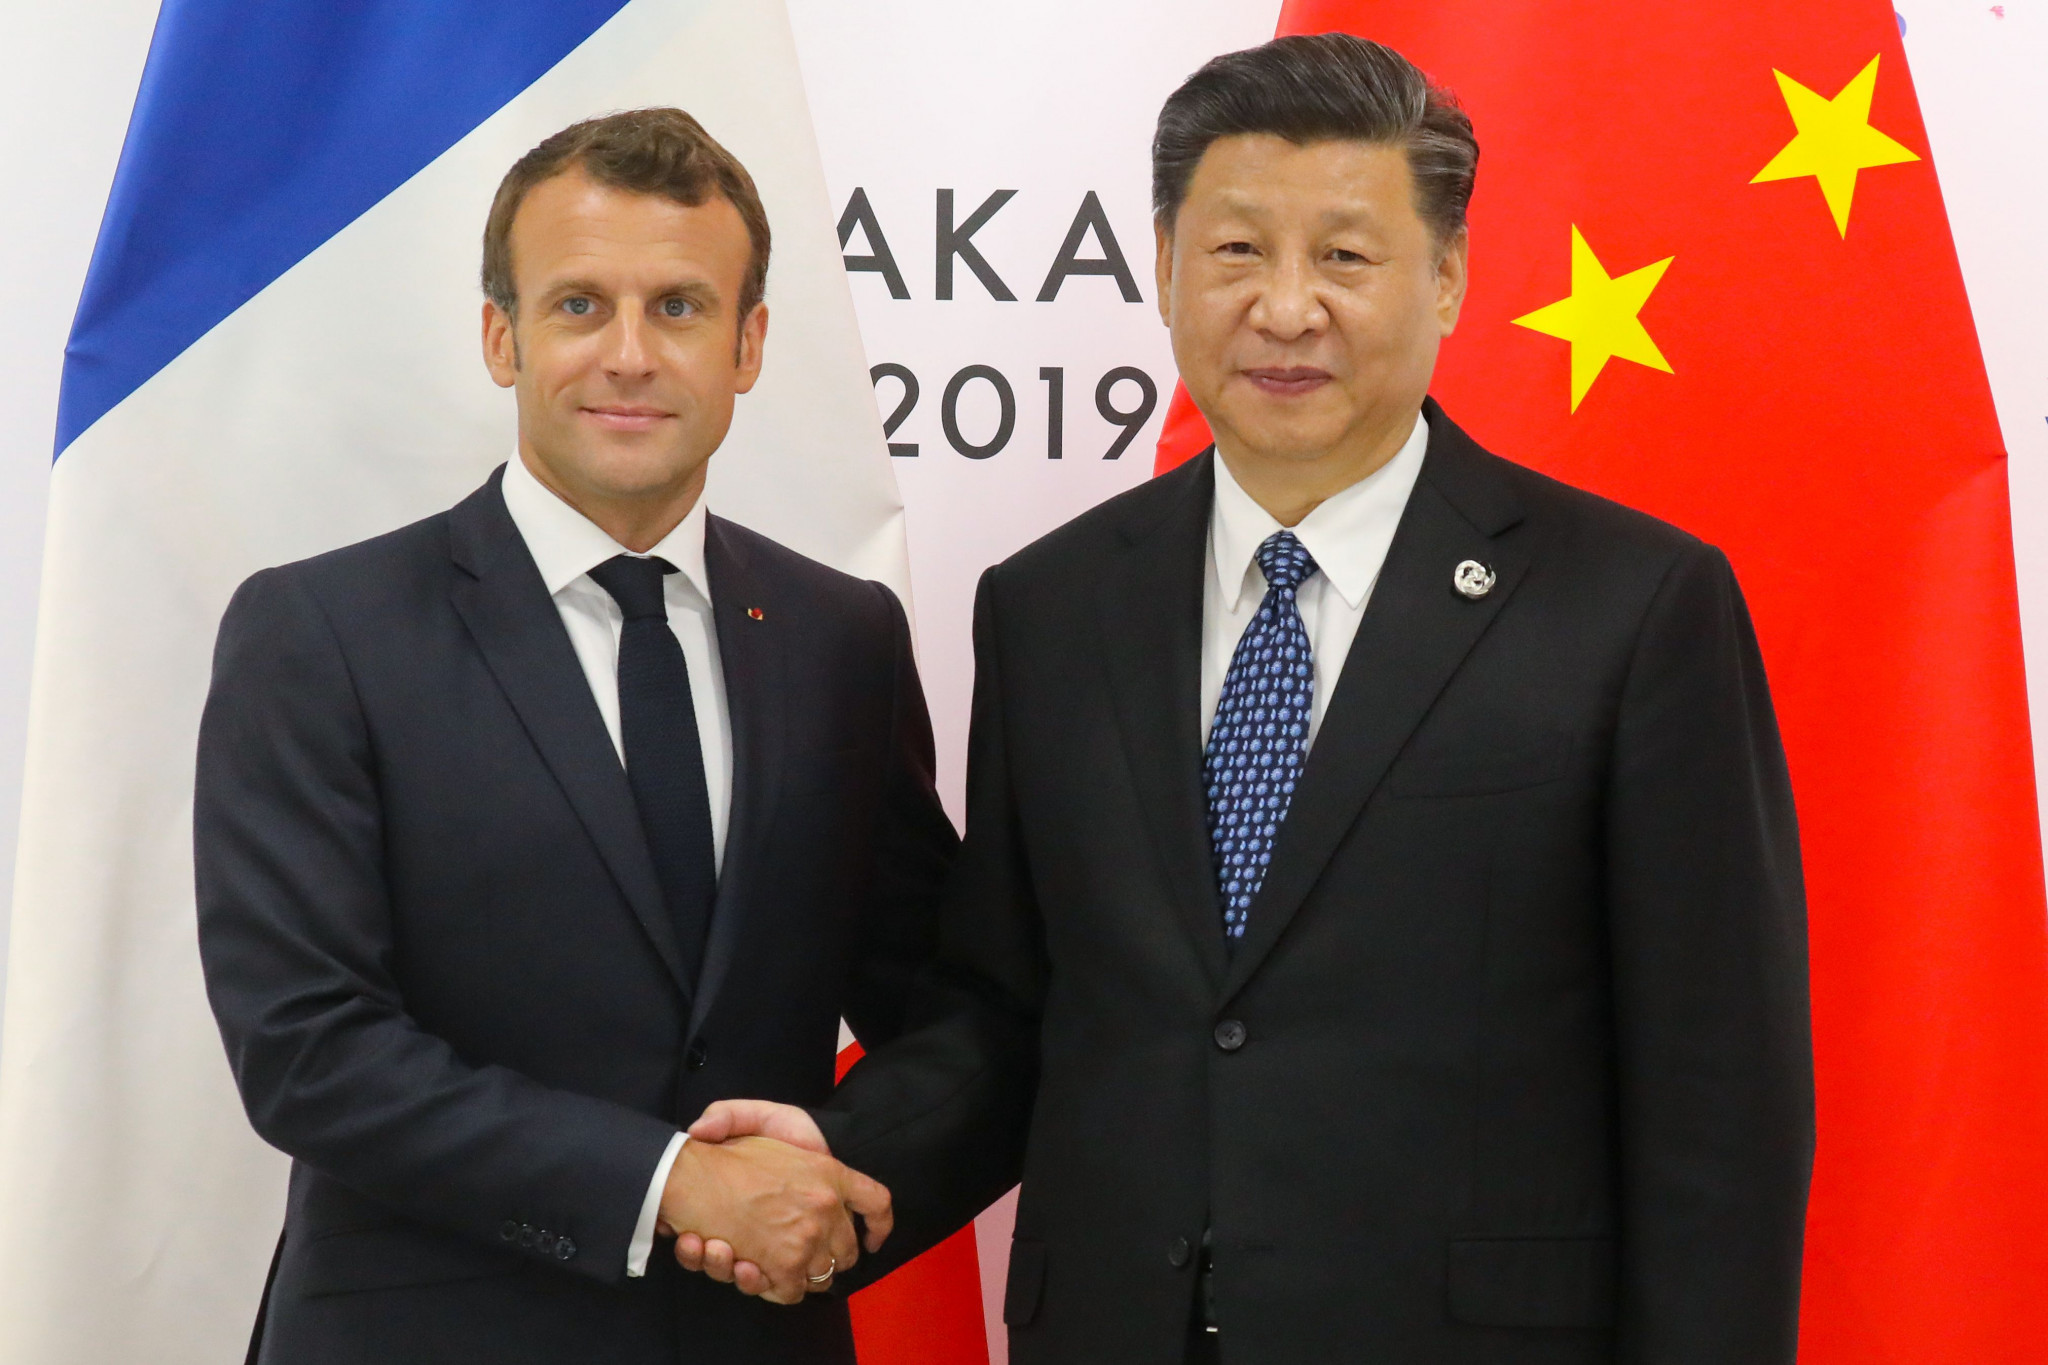 French President Emmanuel Macron, left, and Chinese President Xi Jinping pictured at the G20 Summit in Osaka, were among the world leaders to listen to the speech from IOC President Thomas Bach ©Getty Images